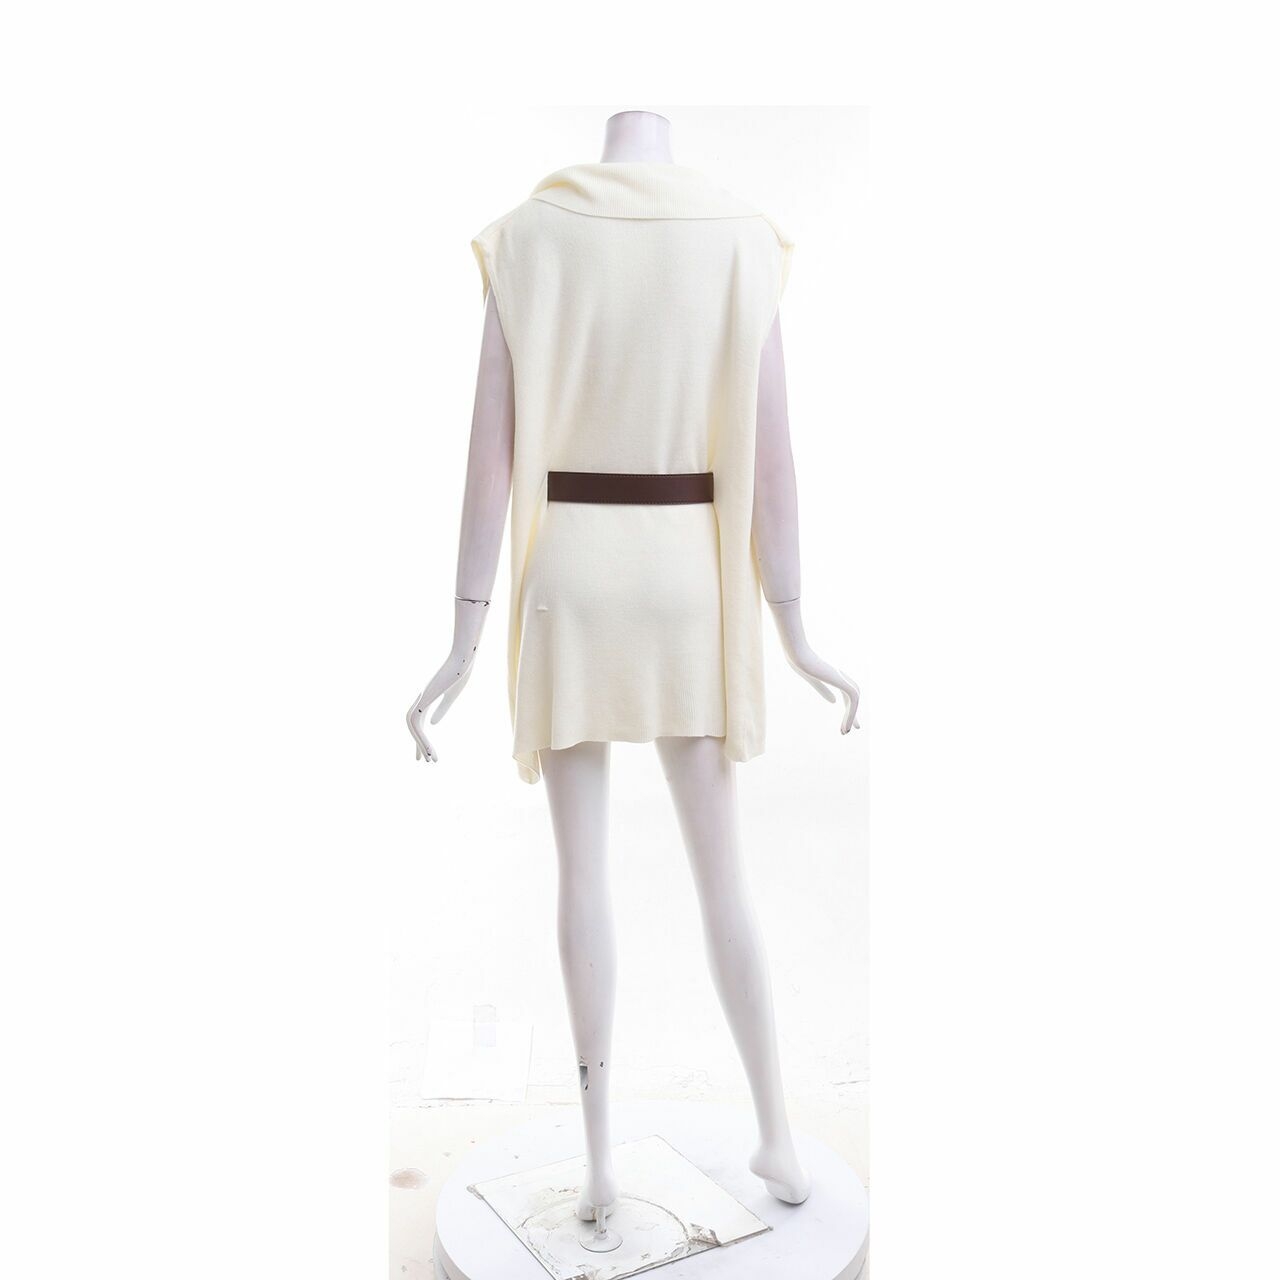 Clay by duma Cream With Belt Vest